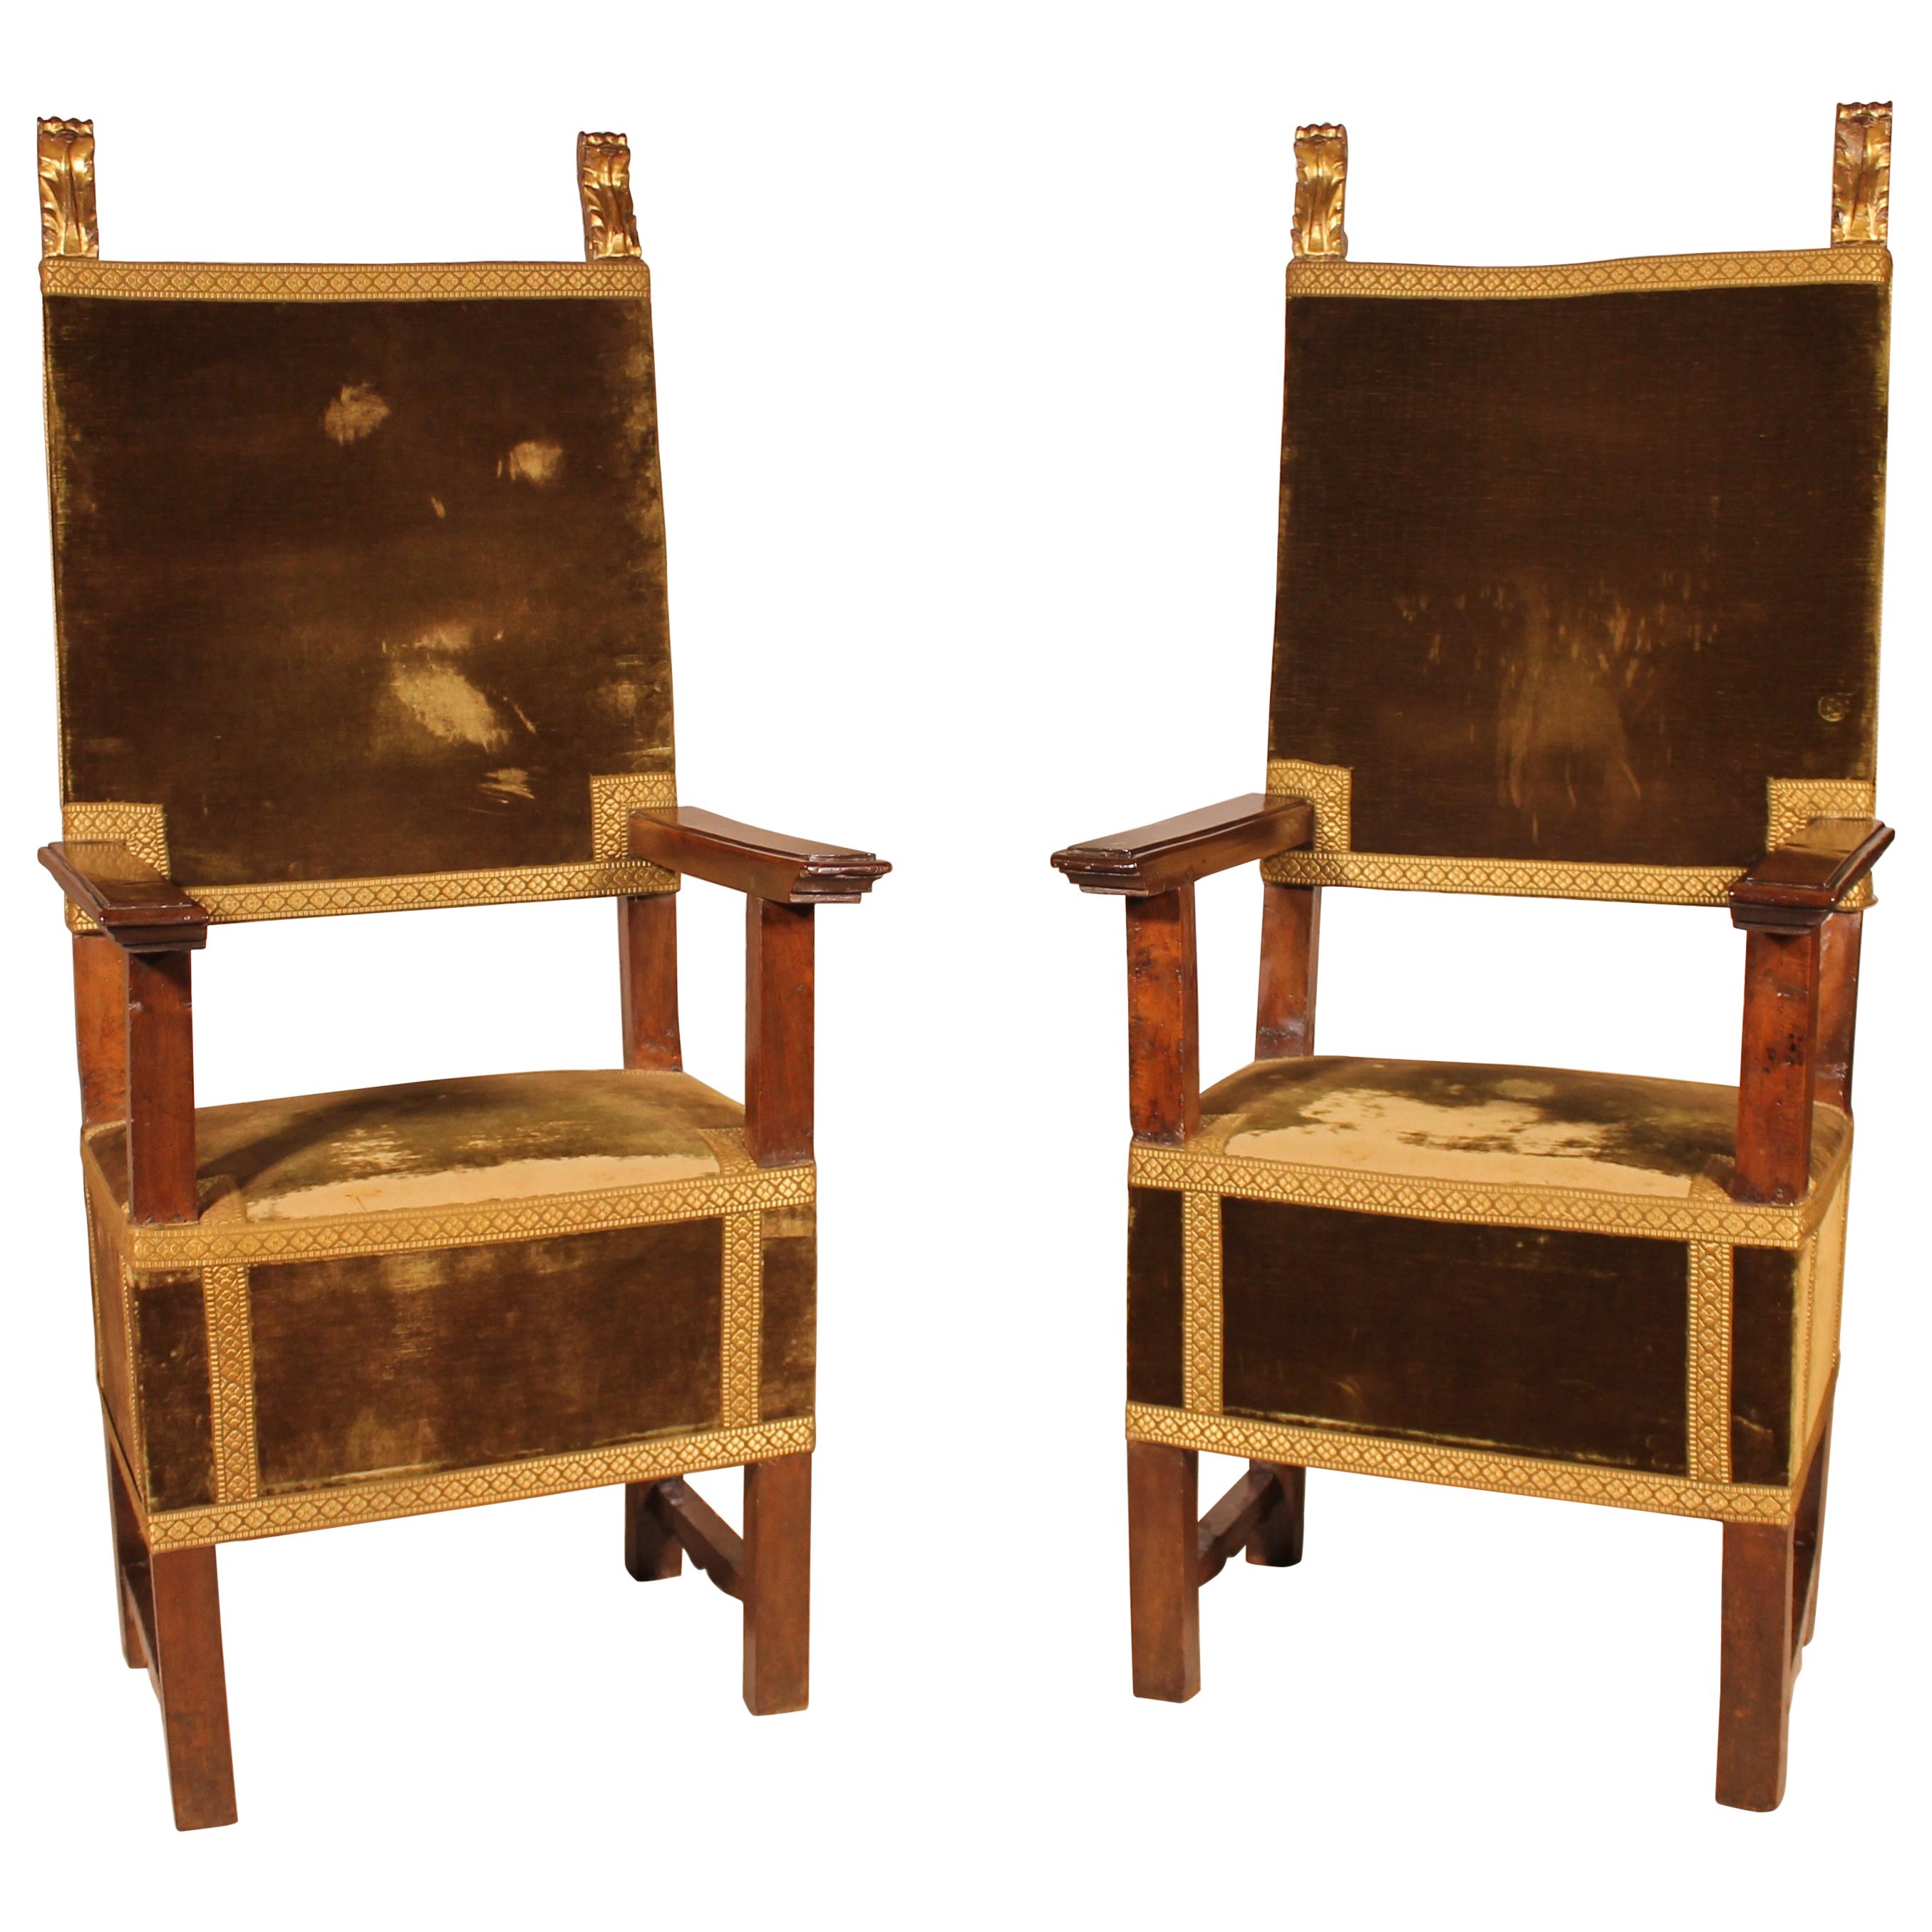 Pair of Italian Armchairs in Walnut circa 1600-Renaissance Period For Sale